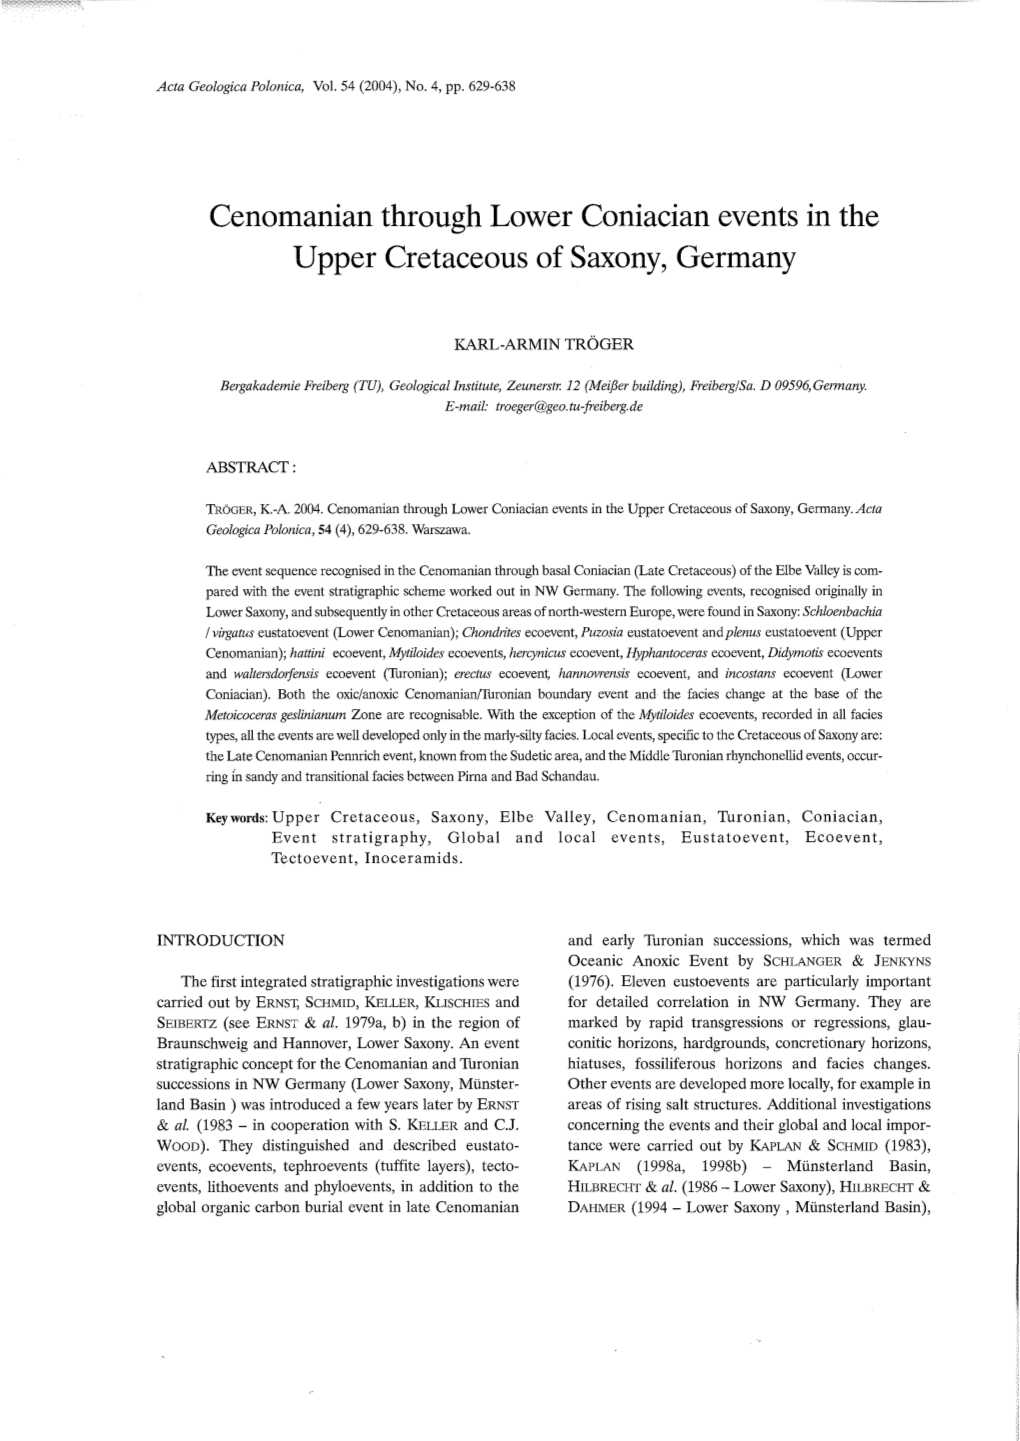 Cenomanian Through Lower Coniacian Events in the Upper Cretaceous of Saxony, Germany